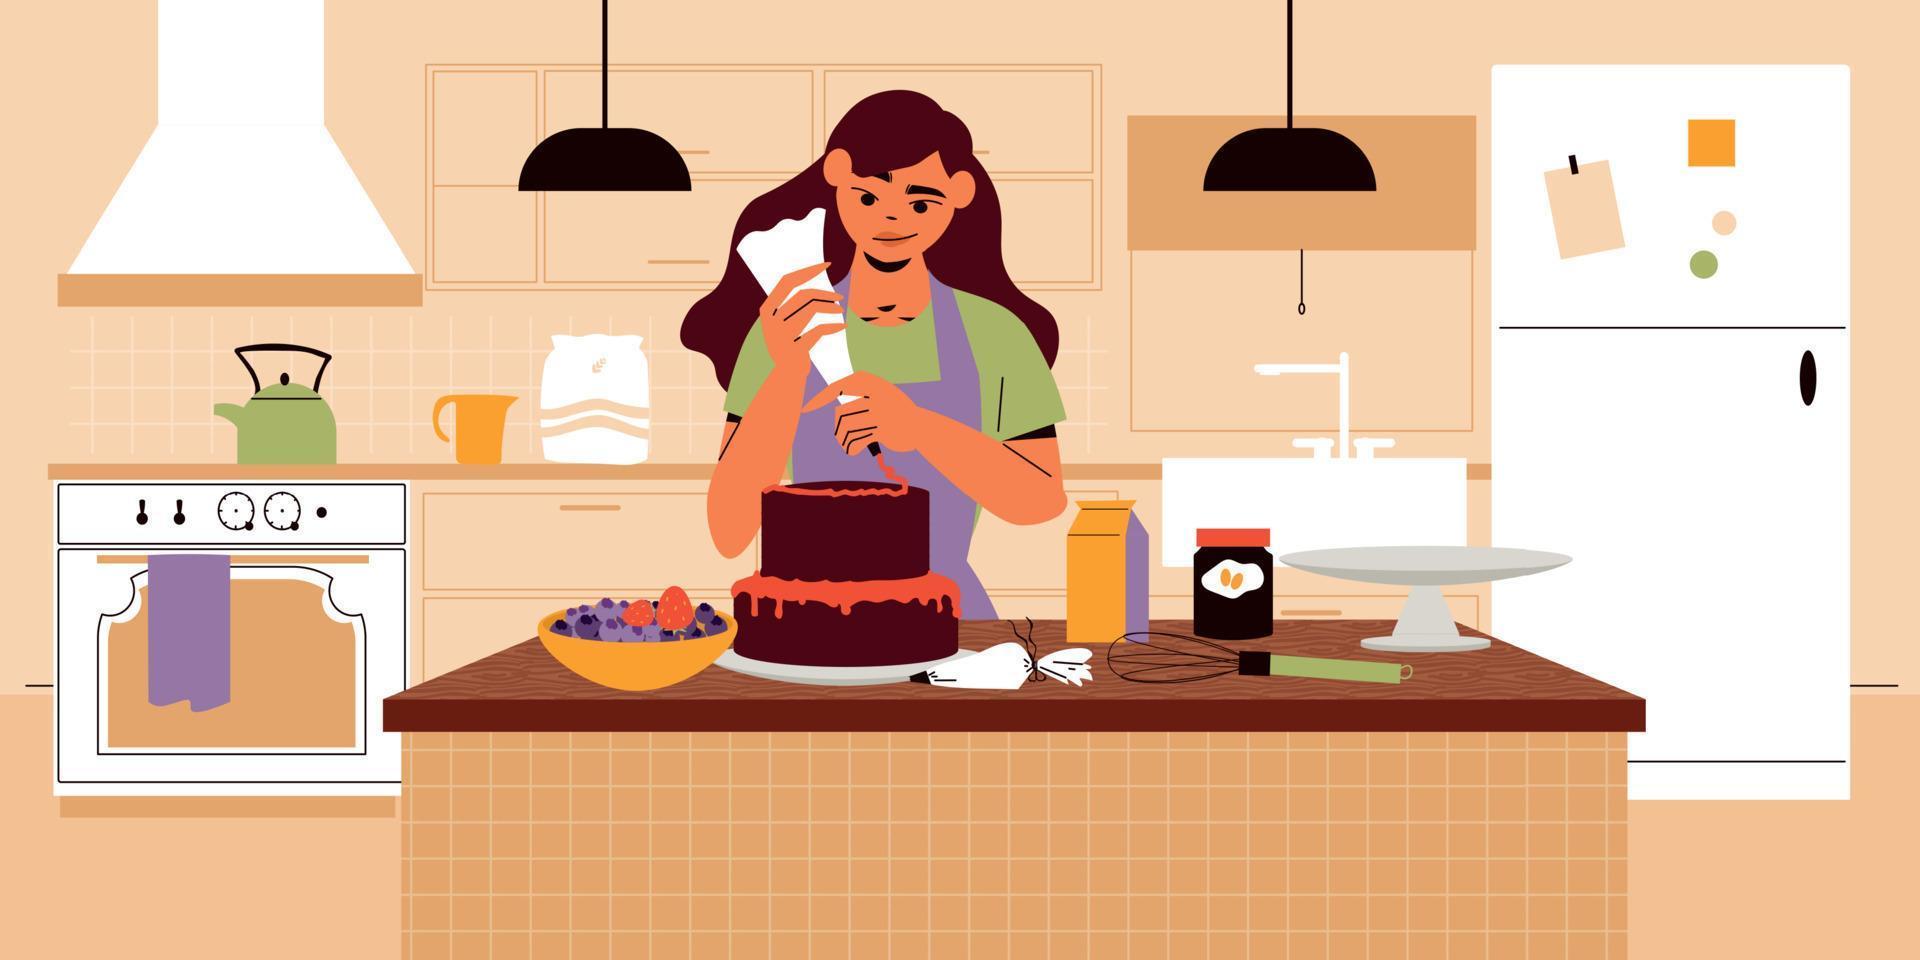 Home Cooking Illustration vector